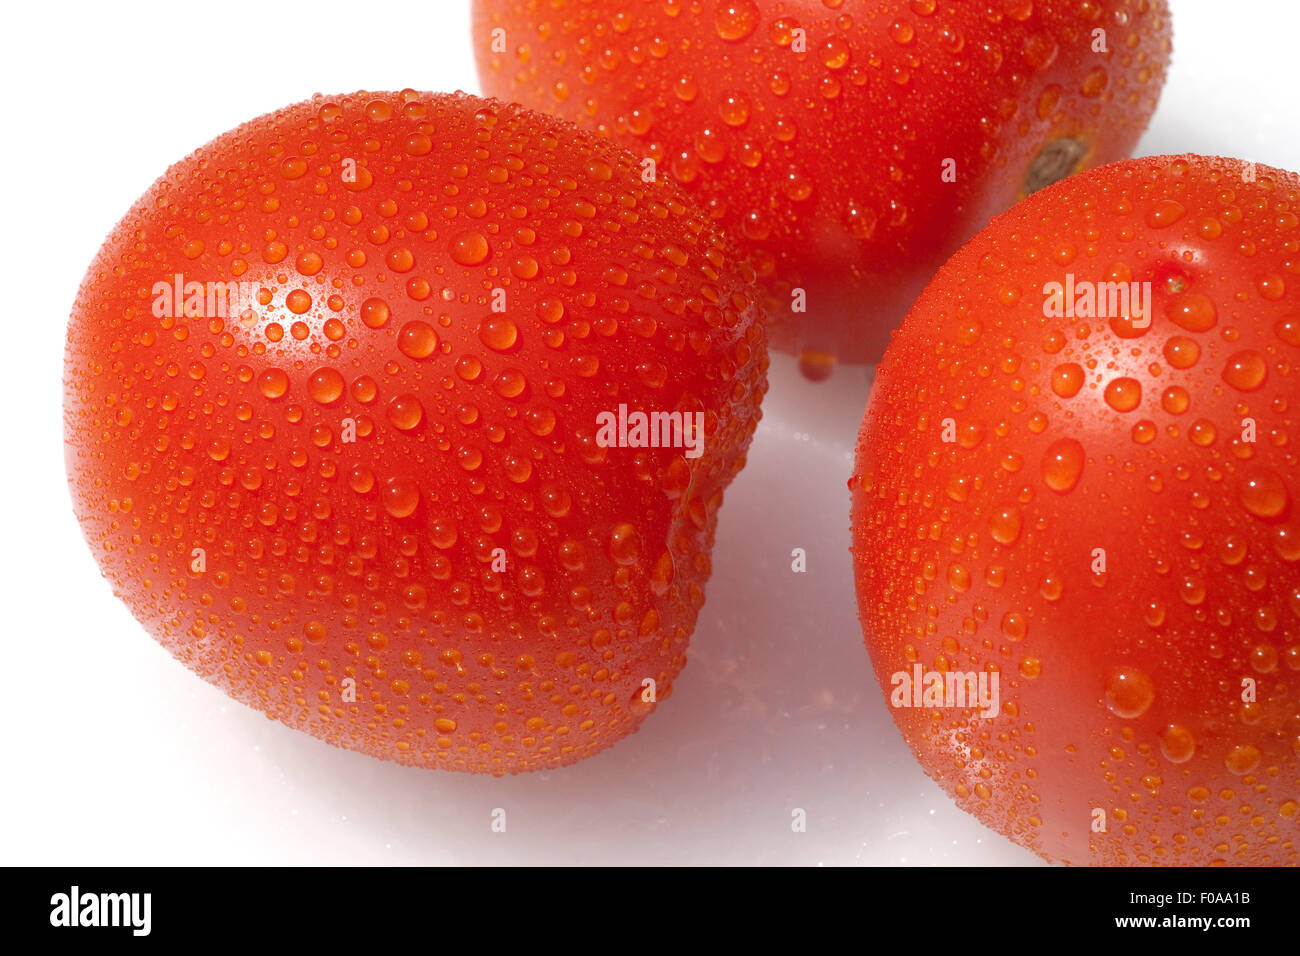 Alamy - photography images and Romatomaten stock hi-res